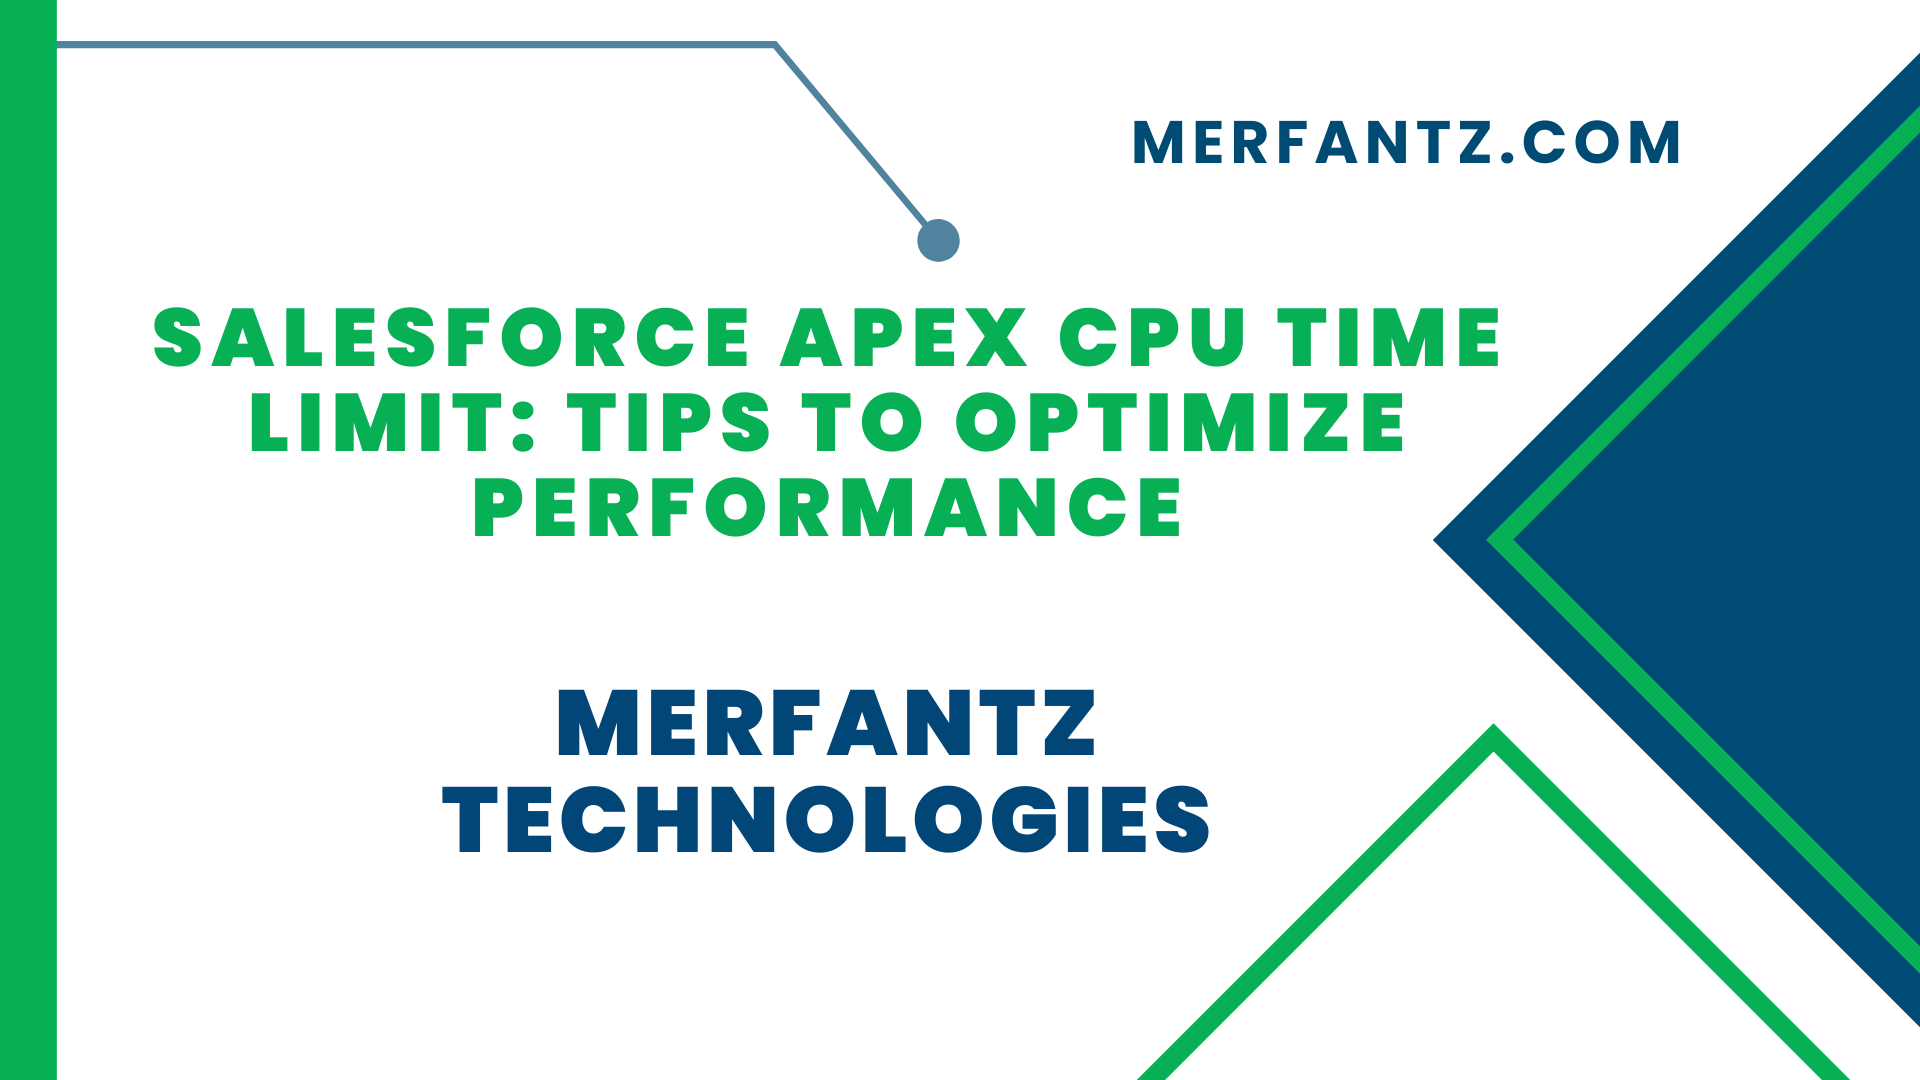 Salesforce Apex CPU Time Limit Tips to Optimize Performance